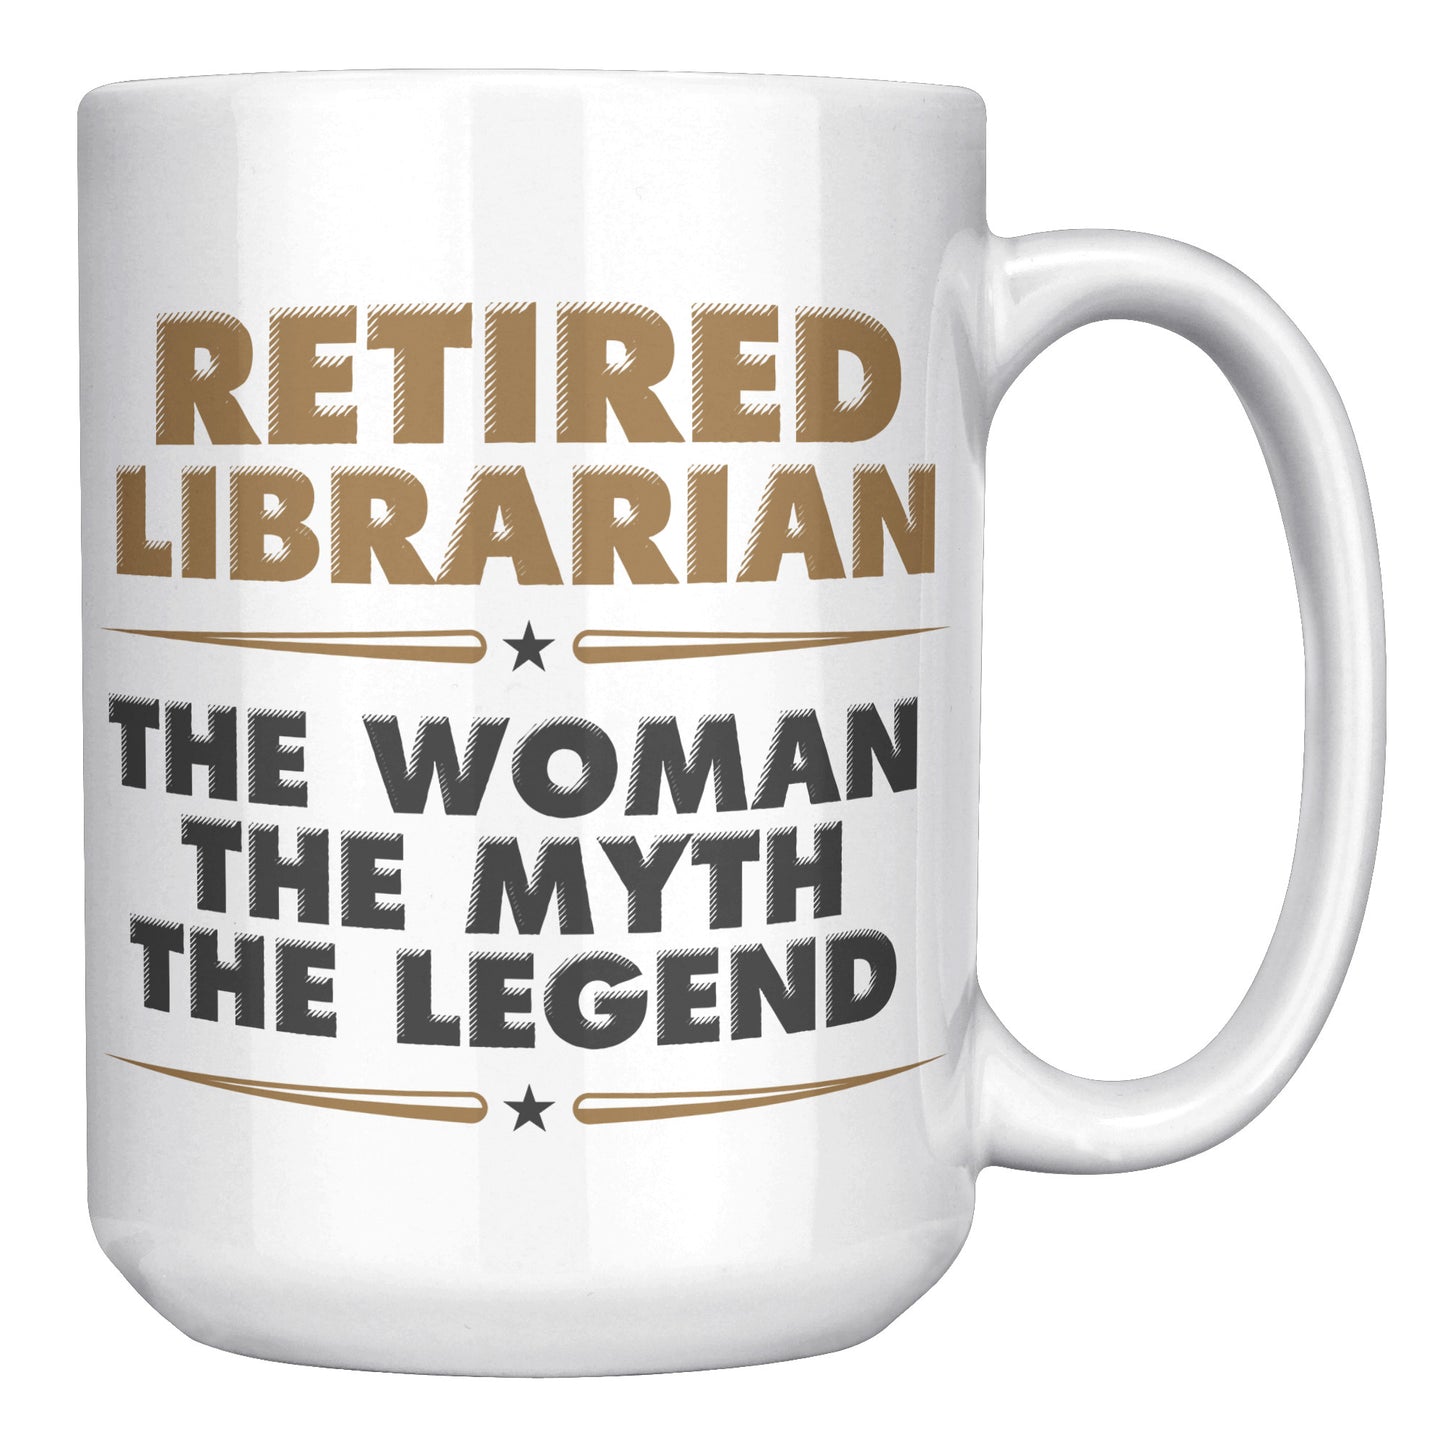 Retired Librarian. The Woman The Myth The Legend | Mug